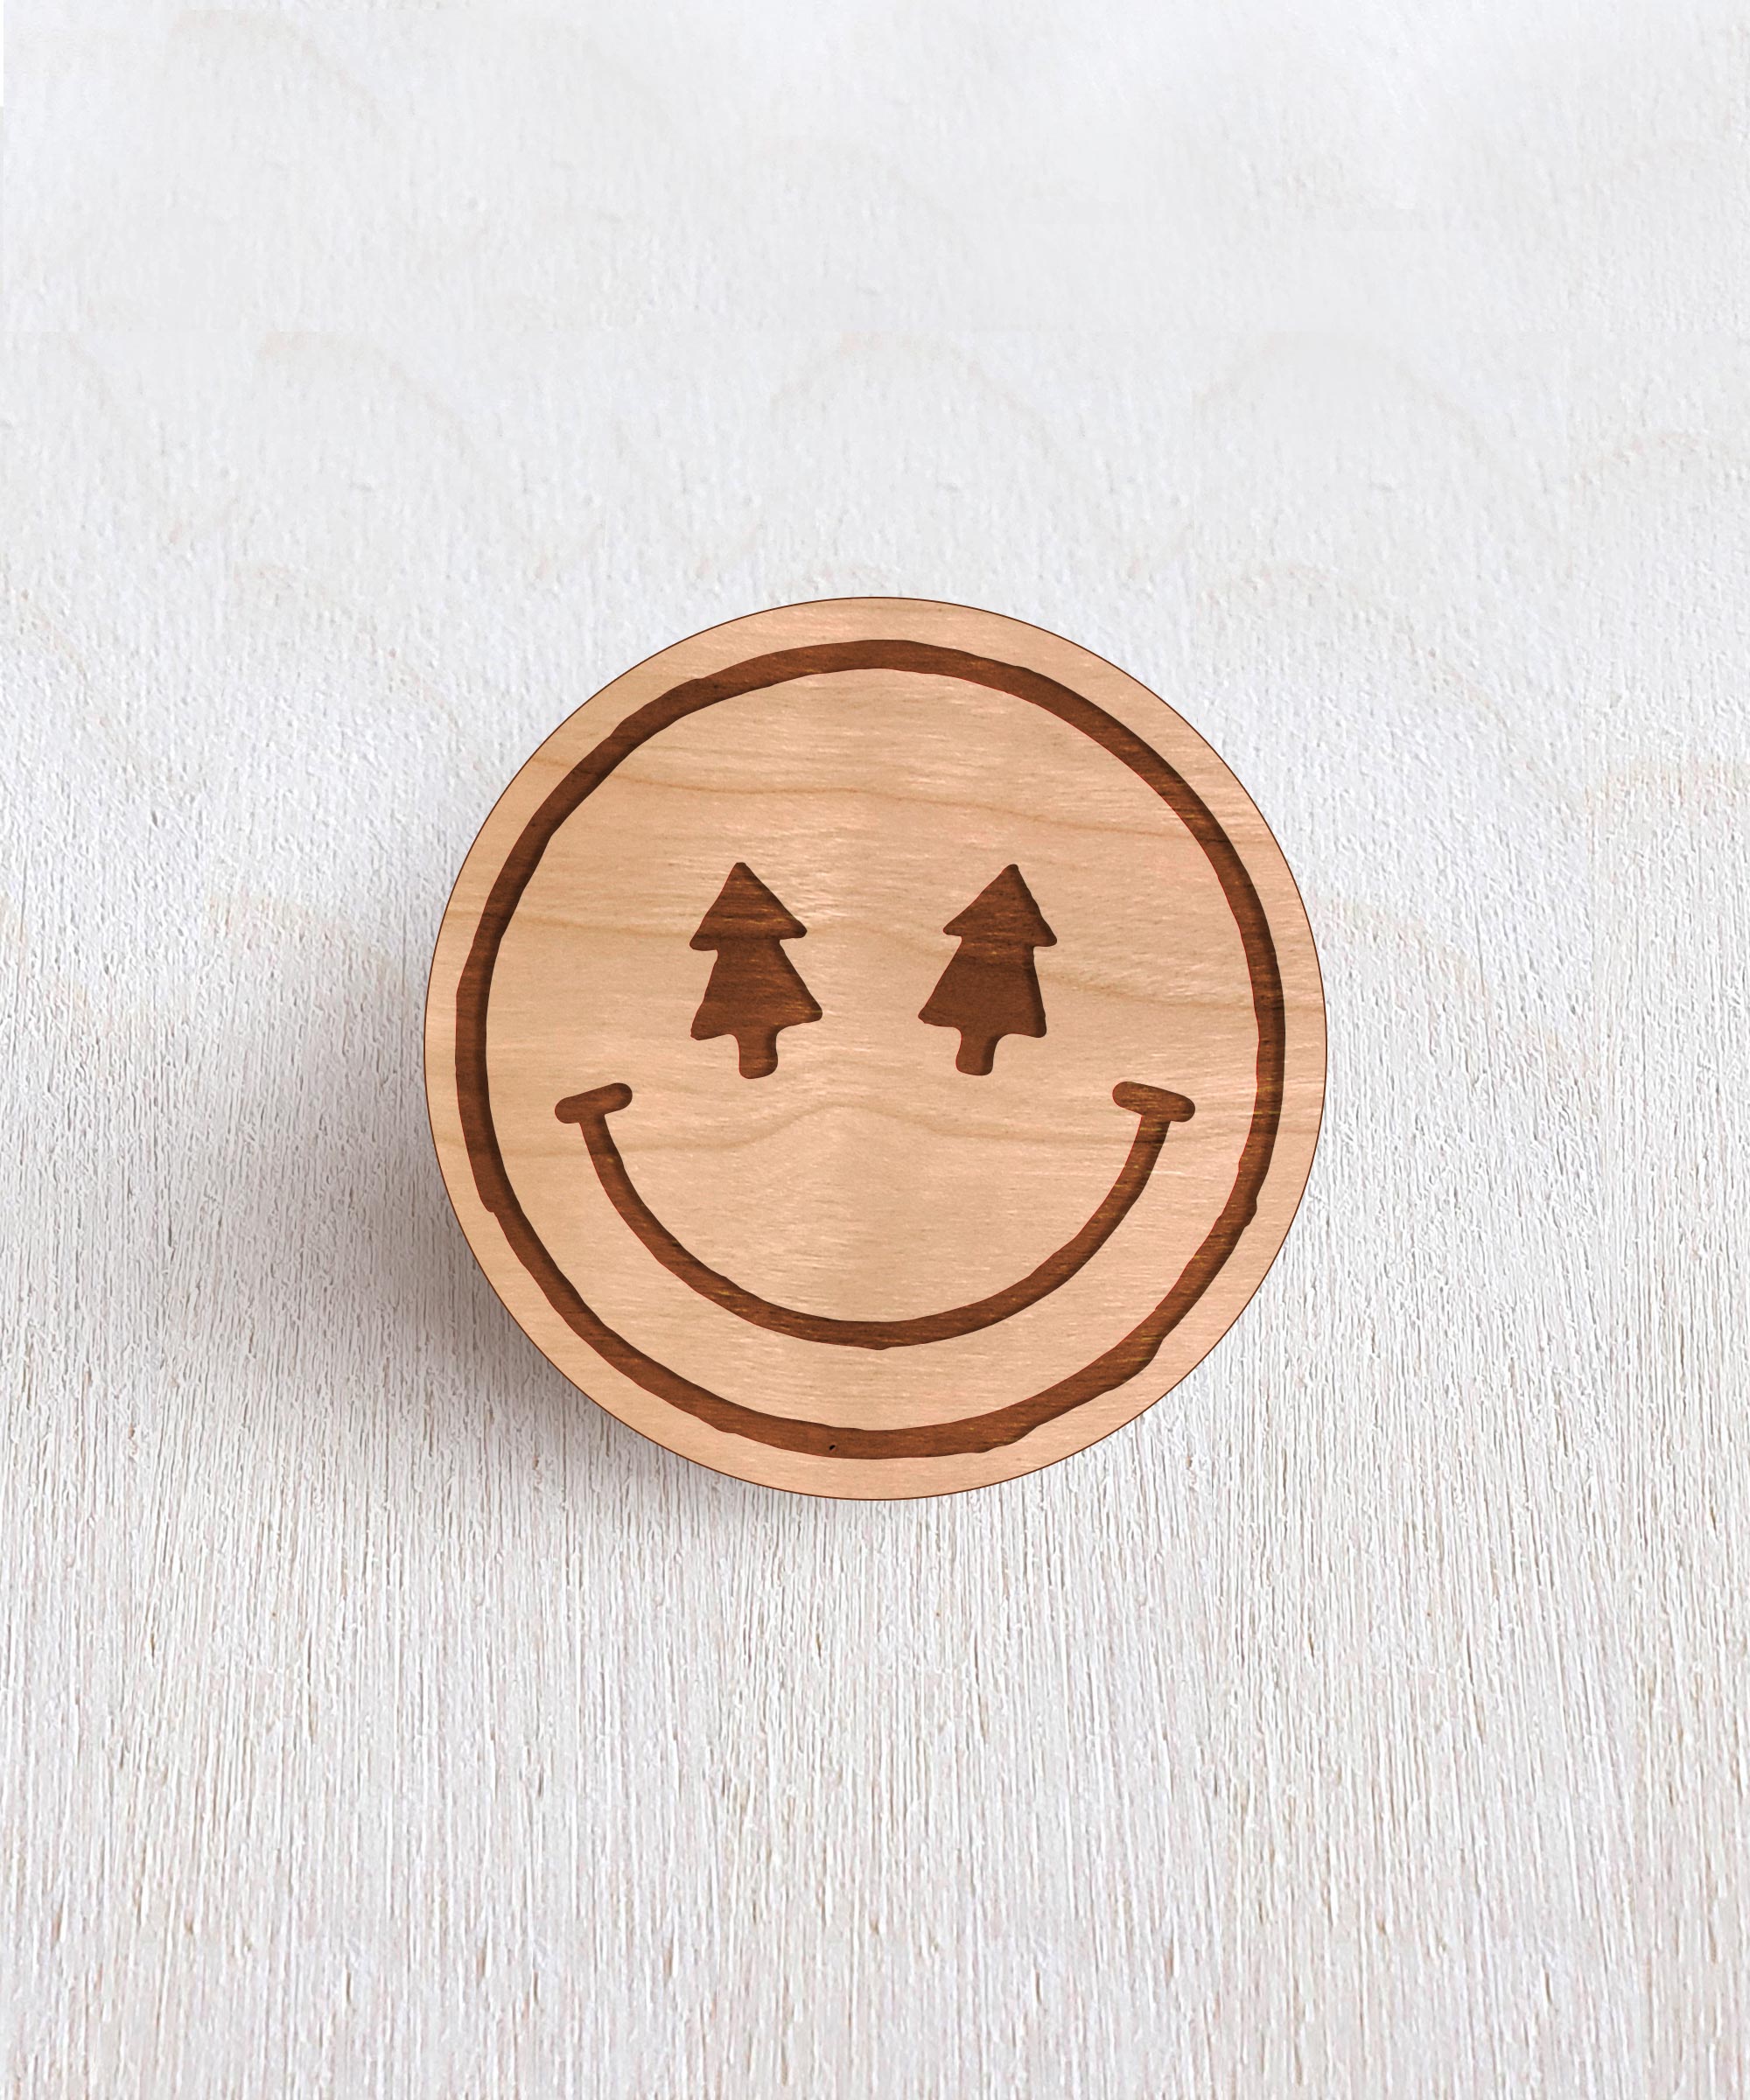 Smiley Face Wooden Pin